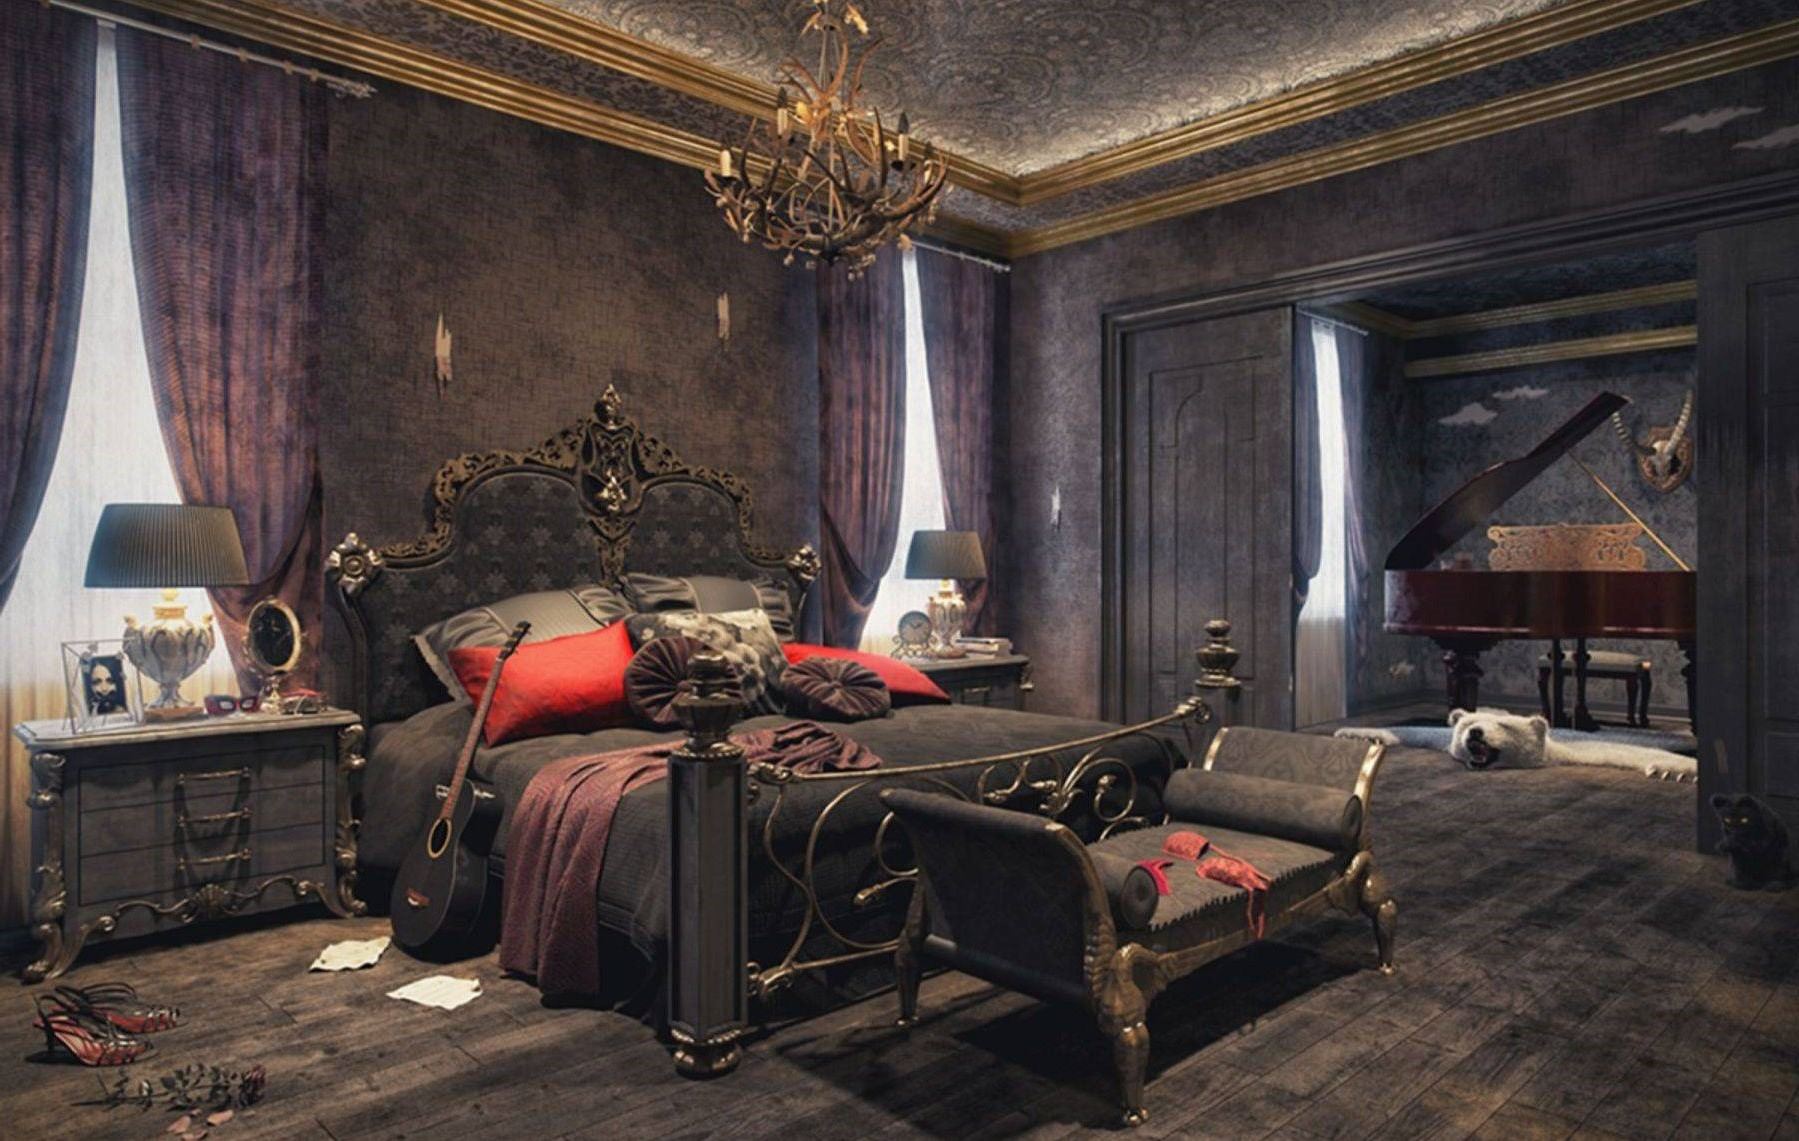 How to Create a Gothic Bedroom Décor